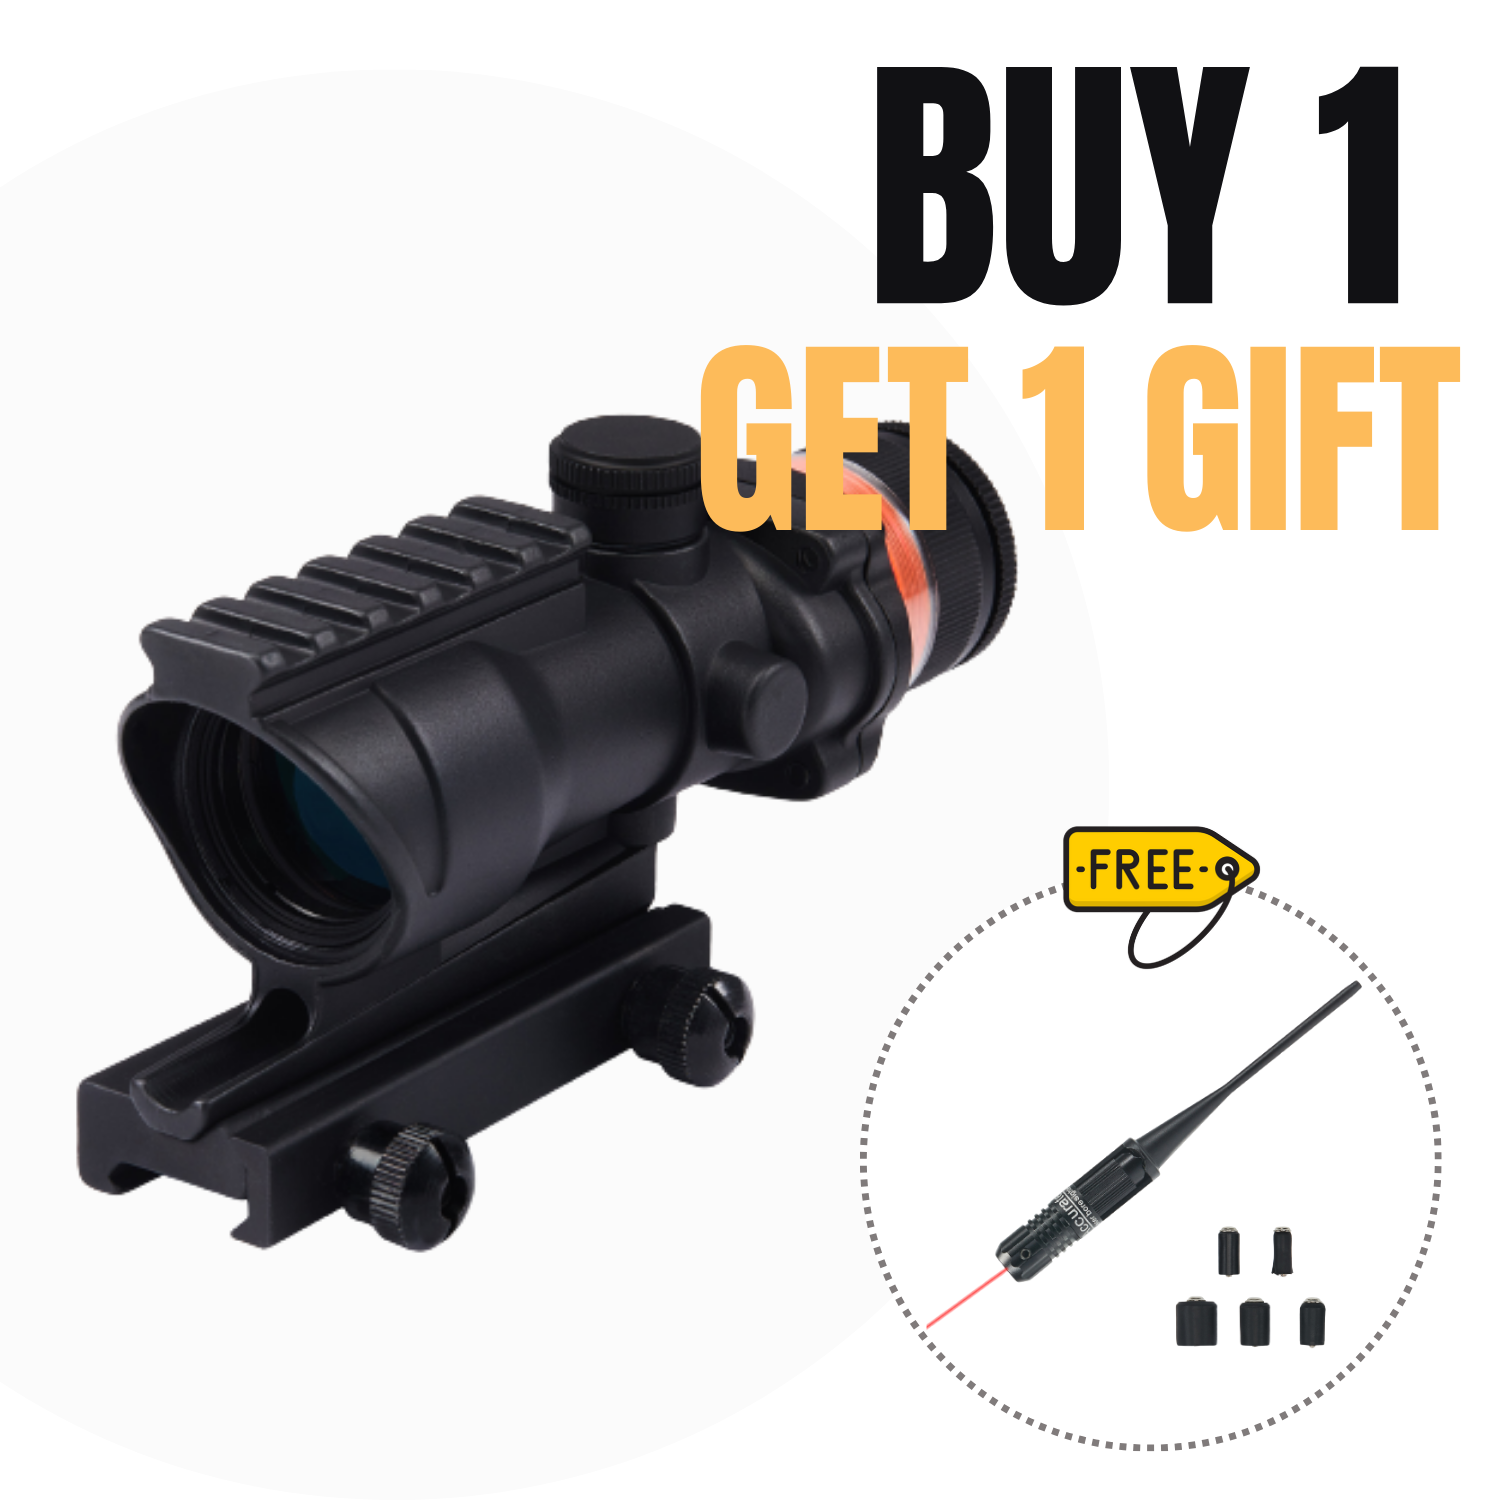 Rifle Scope Sale 4x32 Tactical Rifle Scope with True Fiber Optic Red Illuminated Crosshair & Picatinny Rail on Top